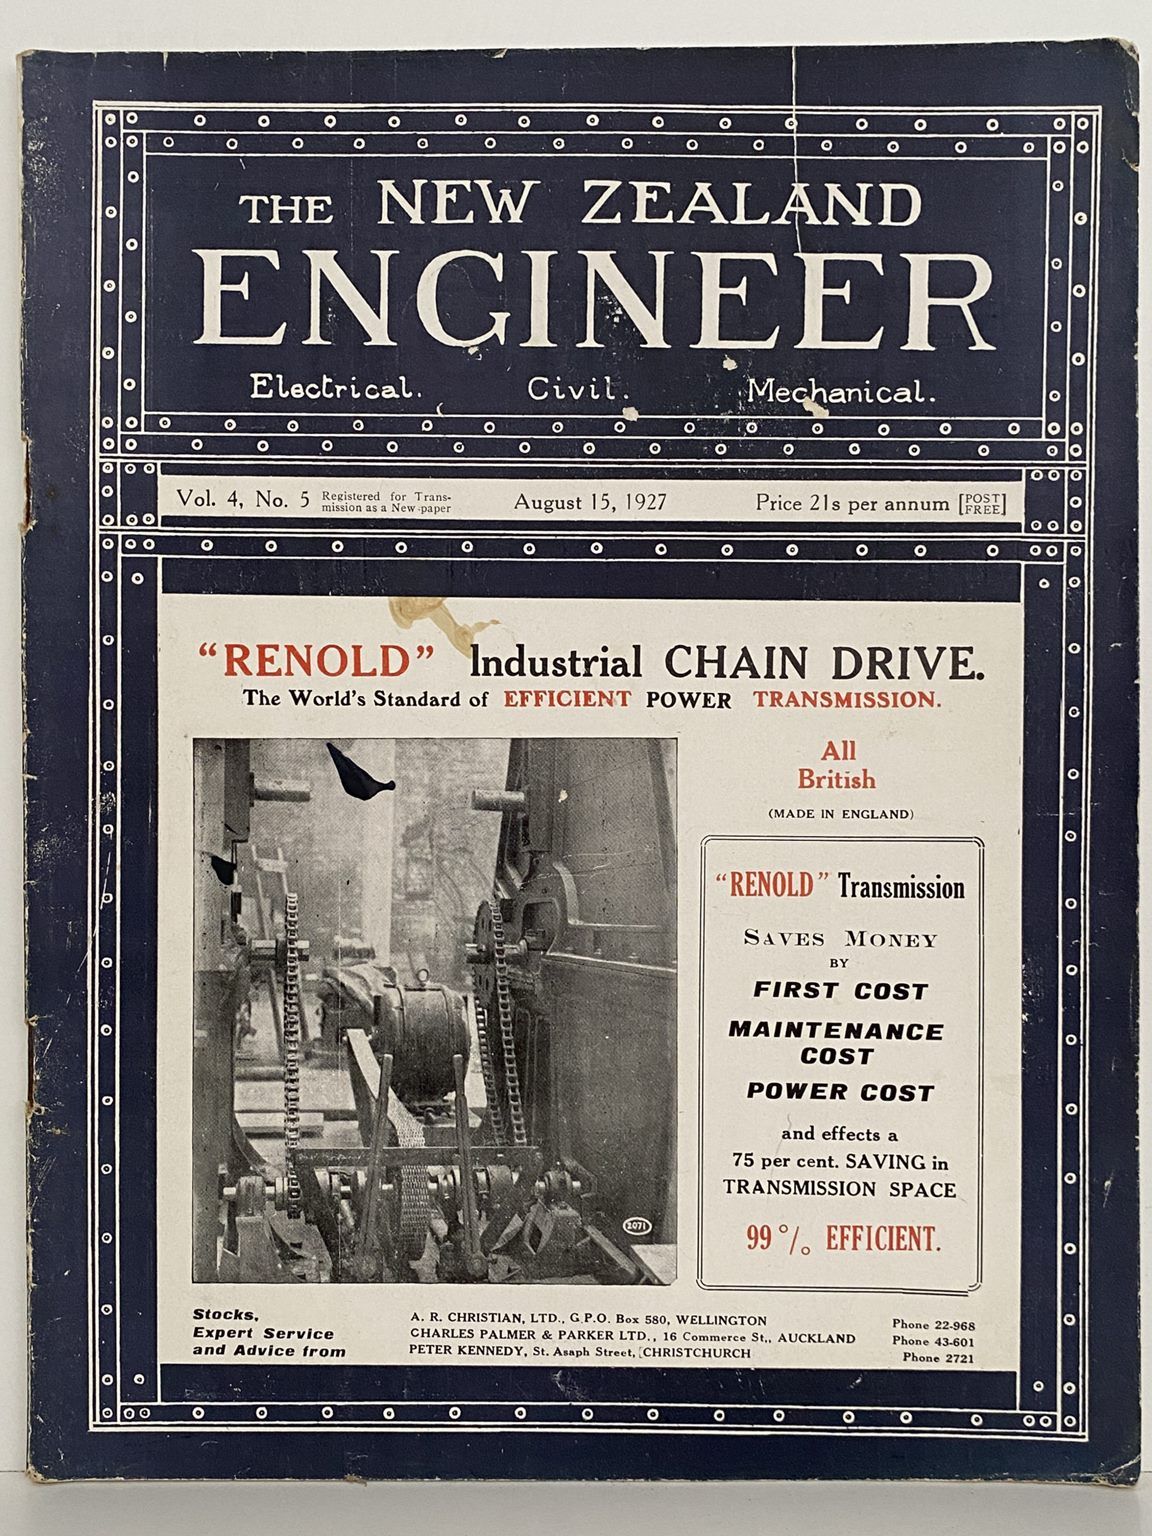 OLD MAGAZINE: The New Zealand Engineer Vol. 4, No. 5 - 15 August 1927